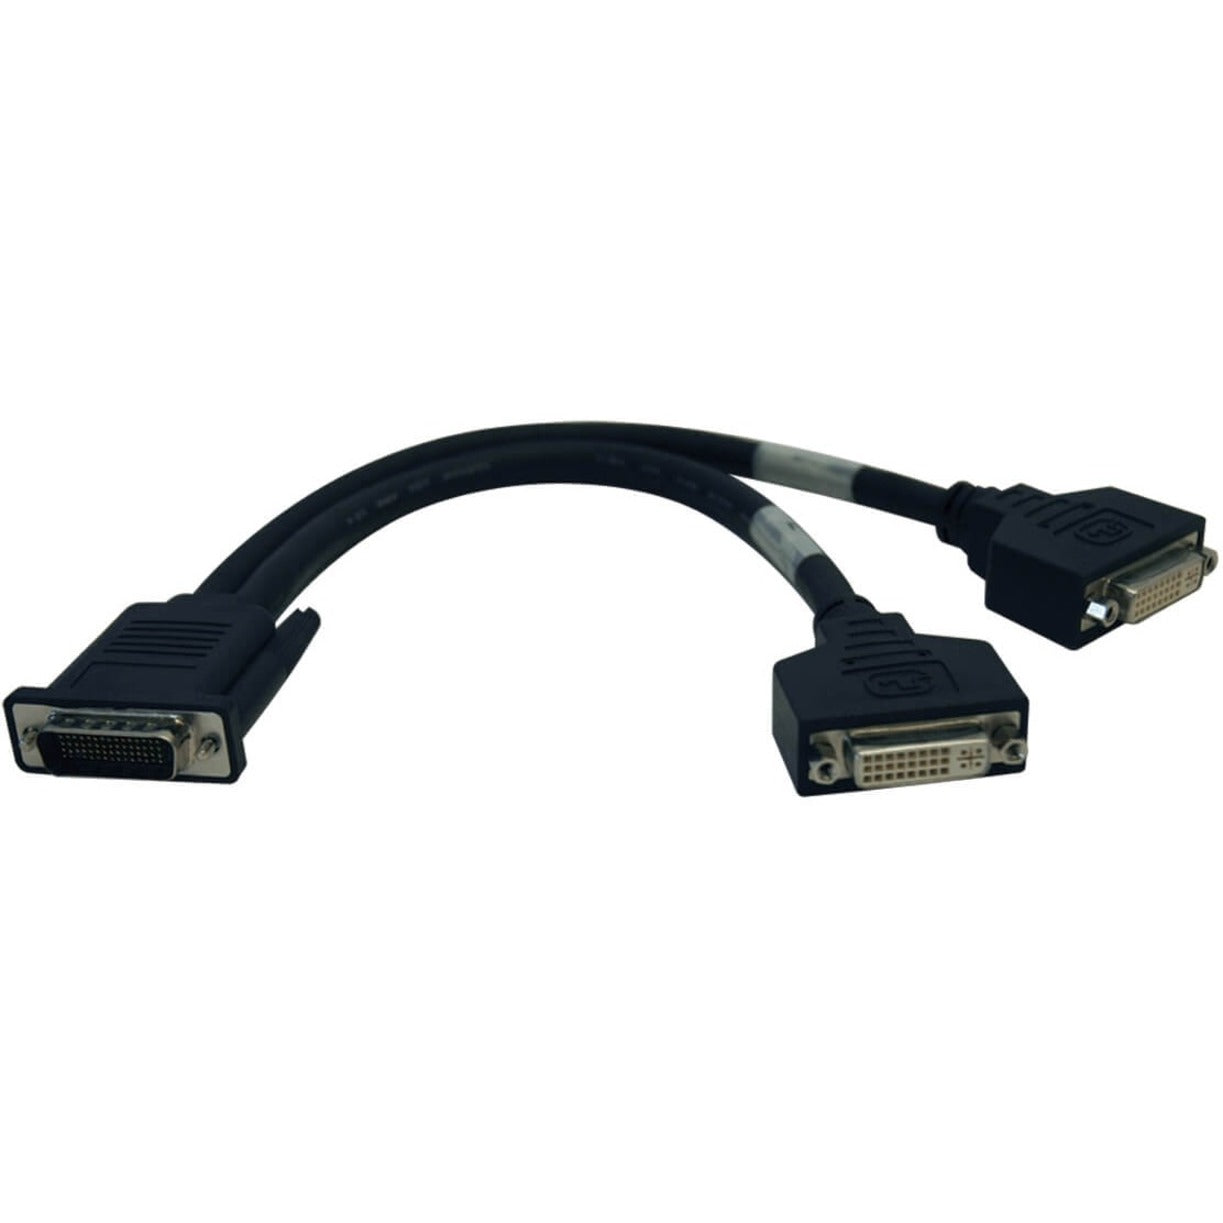 Tripp Lite P576-001 DMS-59 to 2x DVI-I F Splitter Cable, Video Cable for Dual Monitor Setup